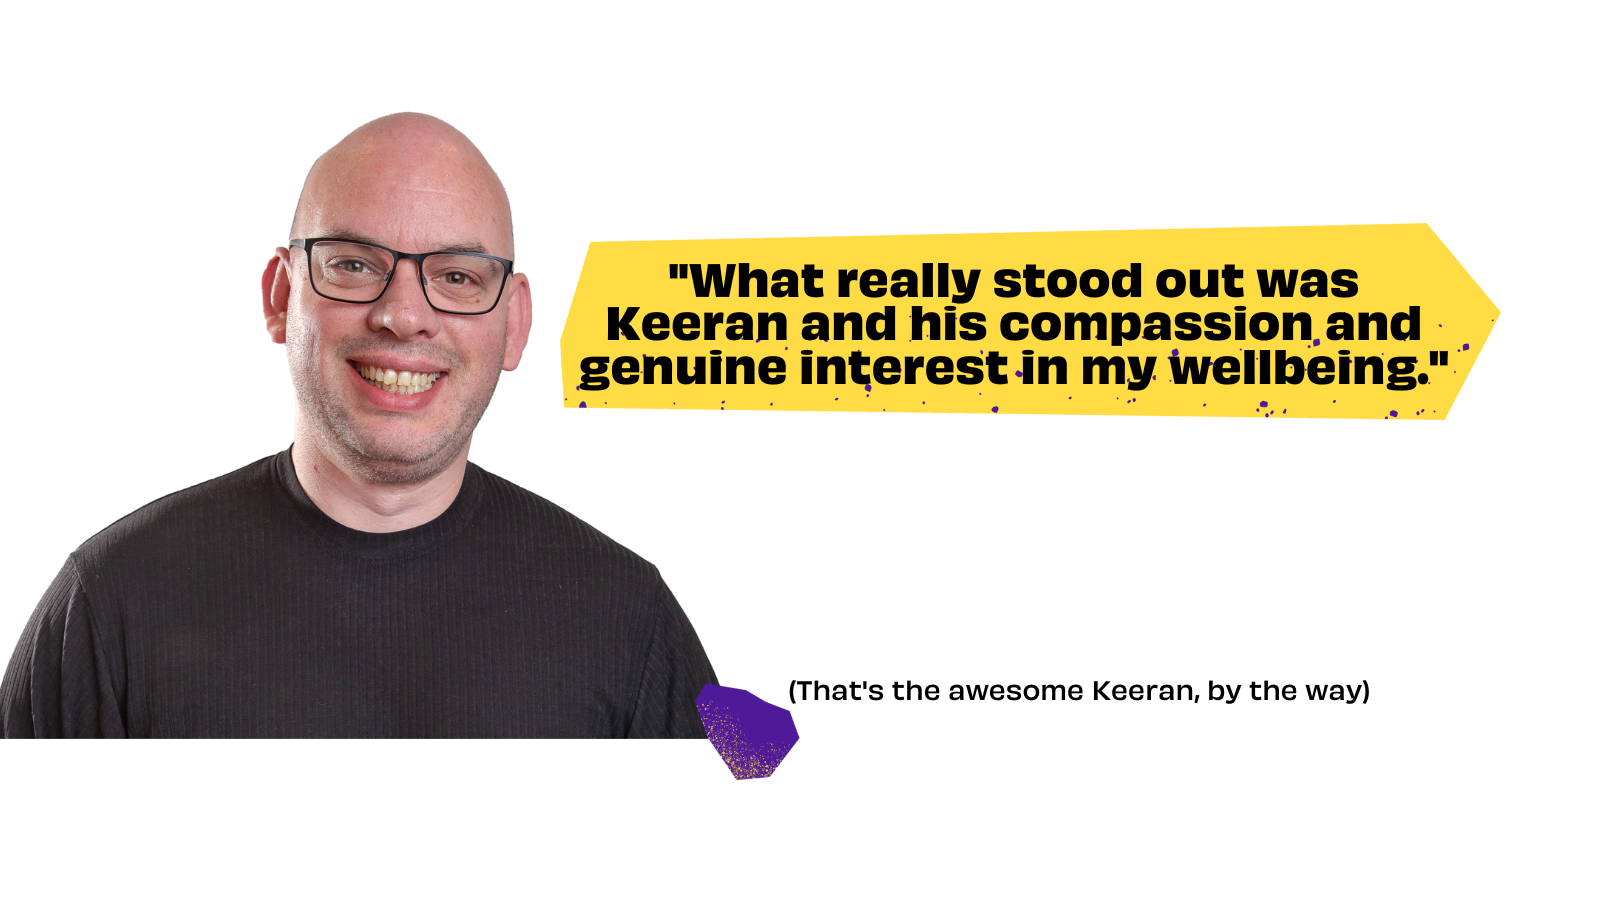 Image showing Keeran with a testimonial saying "What really stood out was Keeran and his compassion and genuine interest in my wellbeing.".